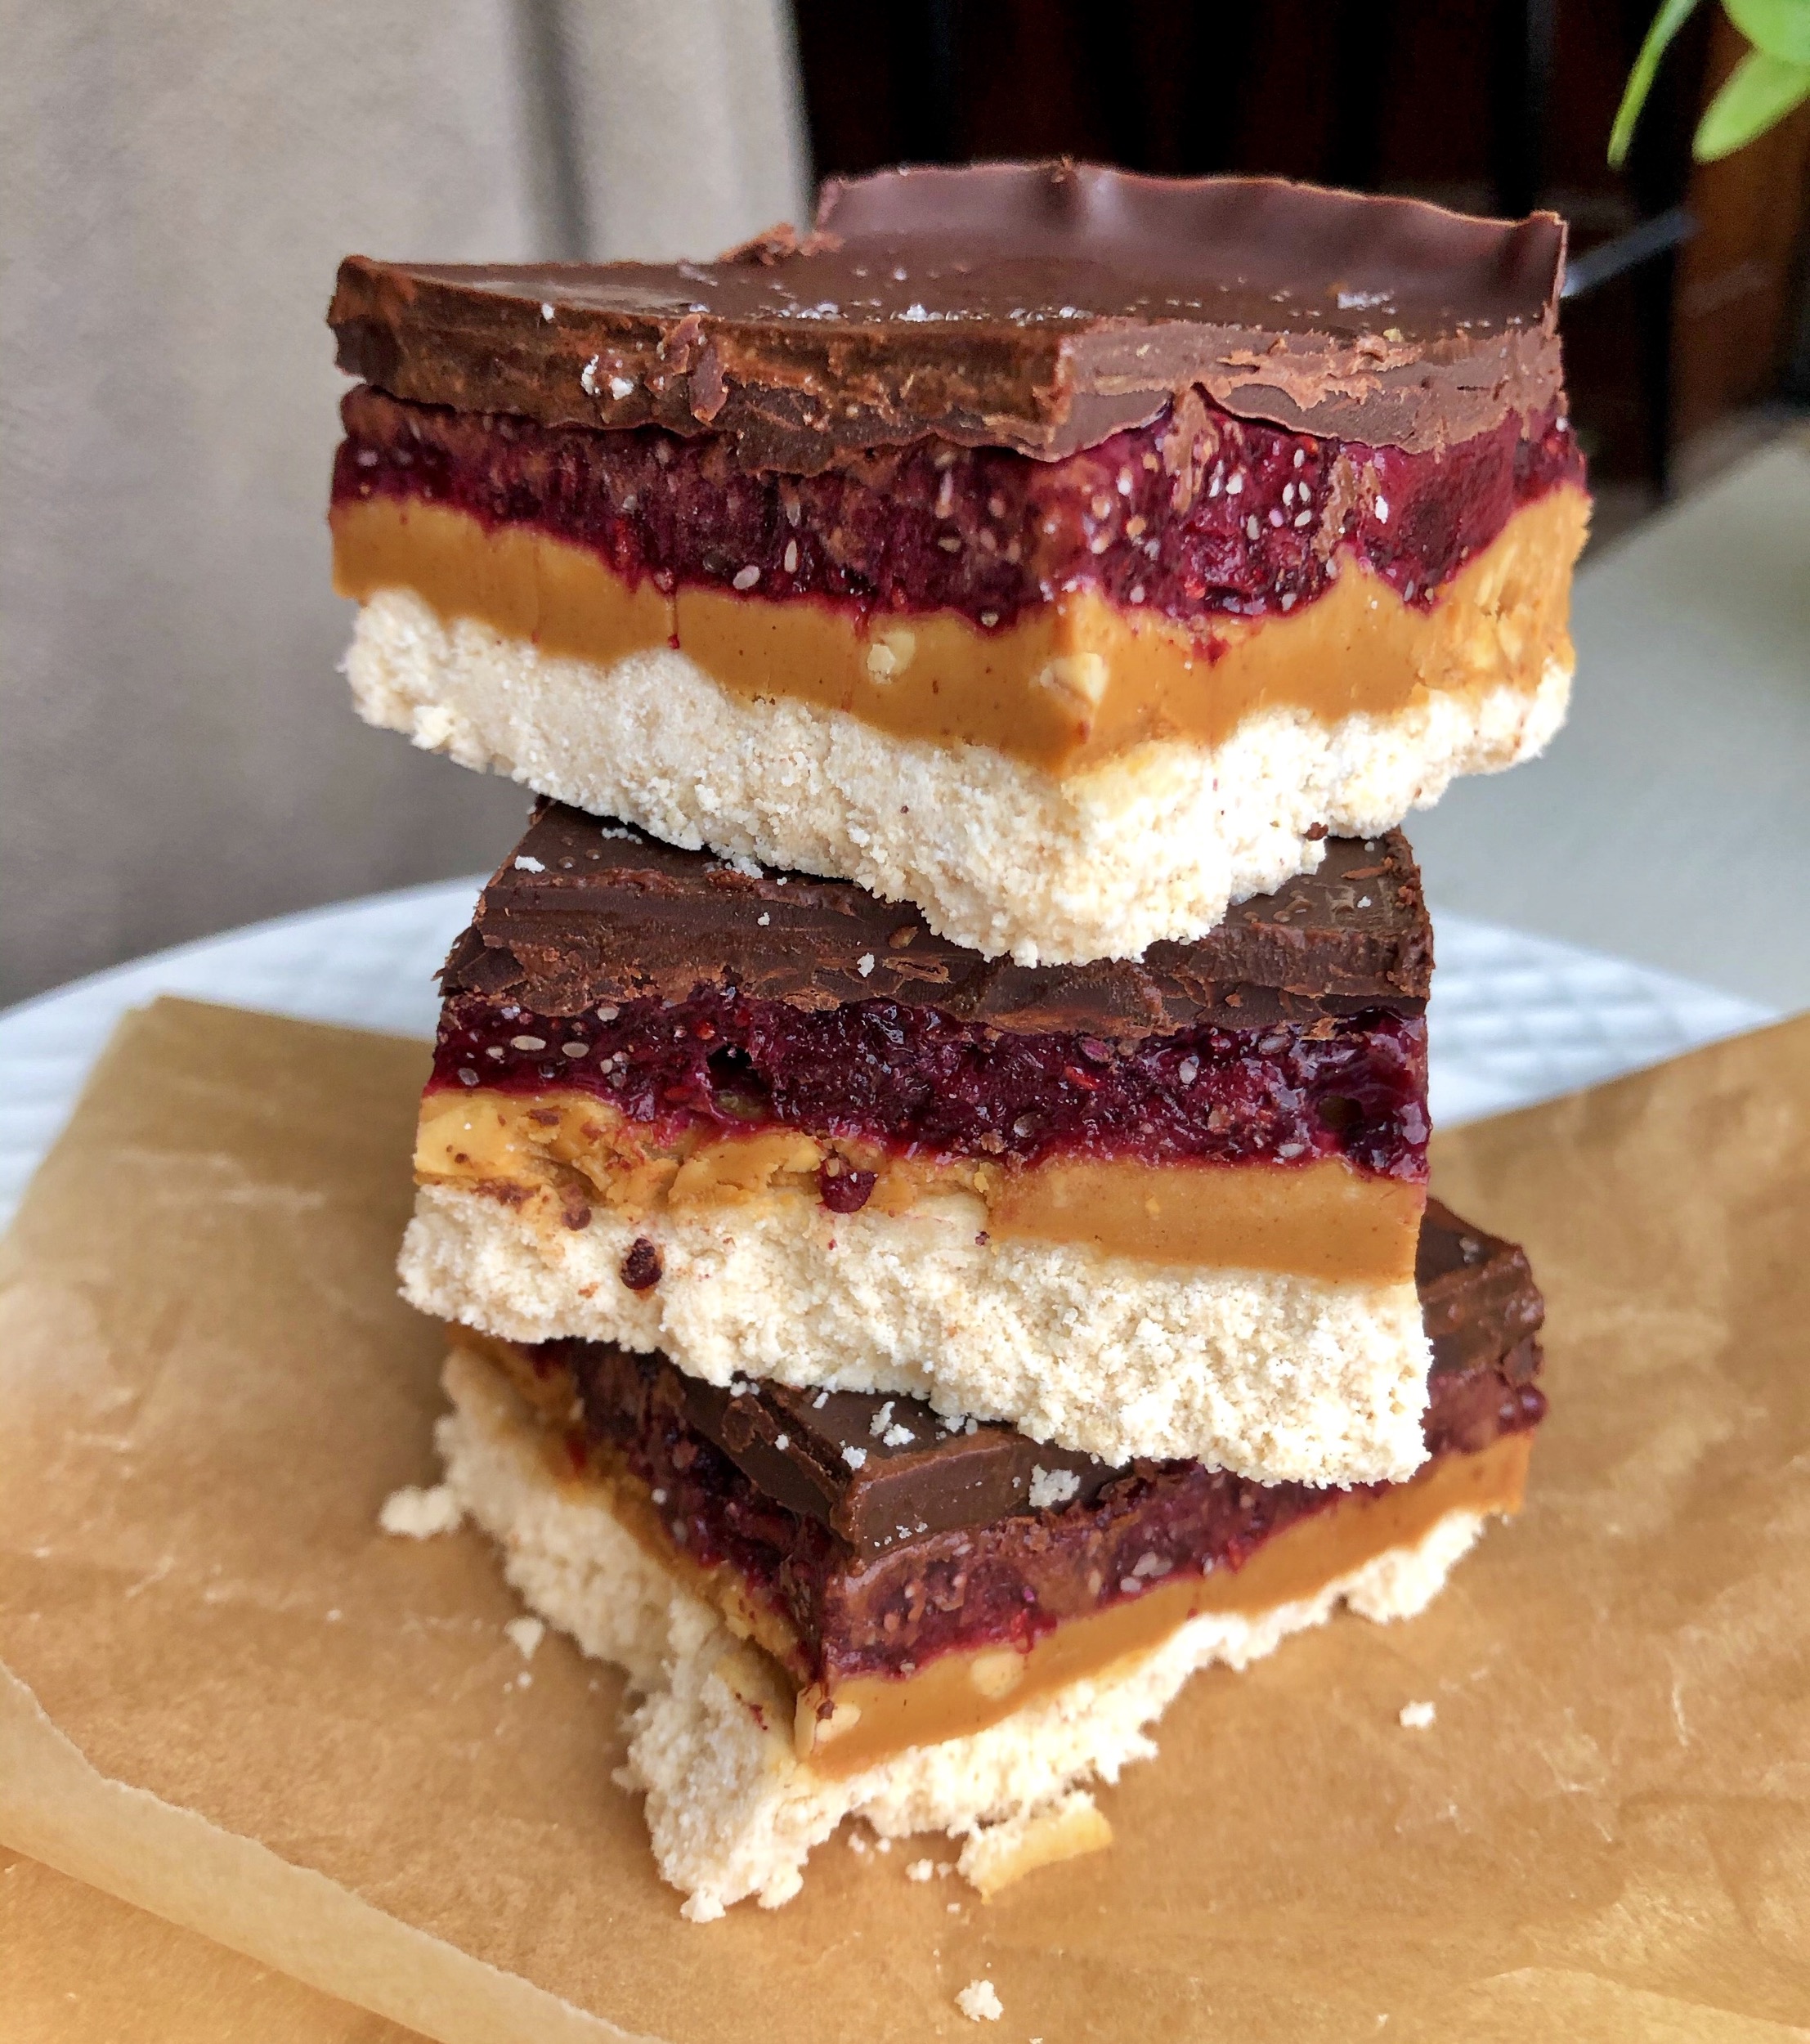 Healthy Peanut Butter and Jelly Bars